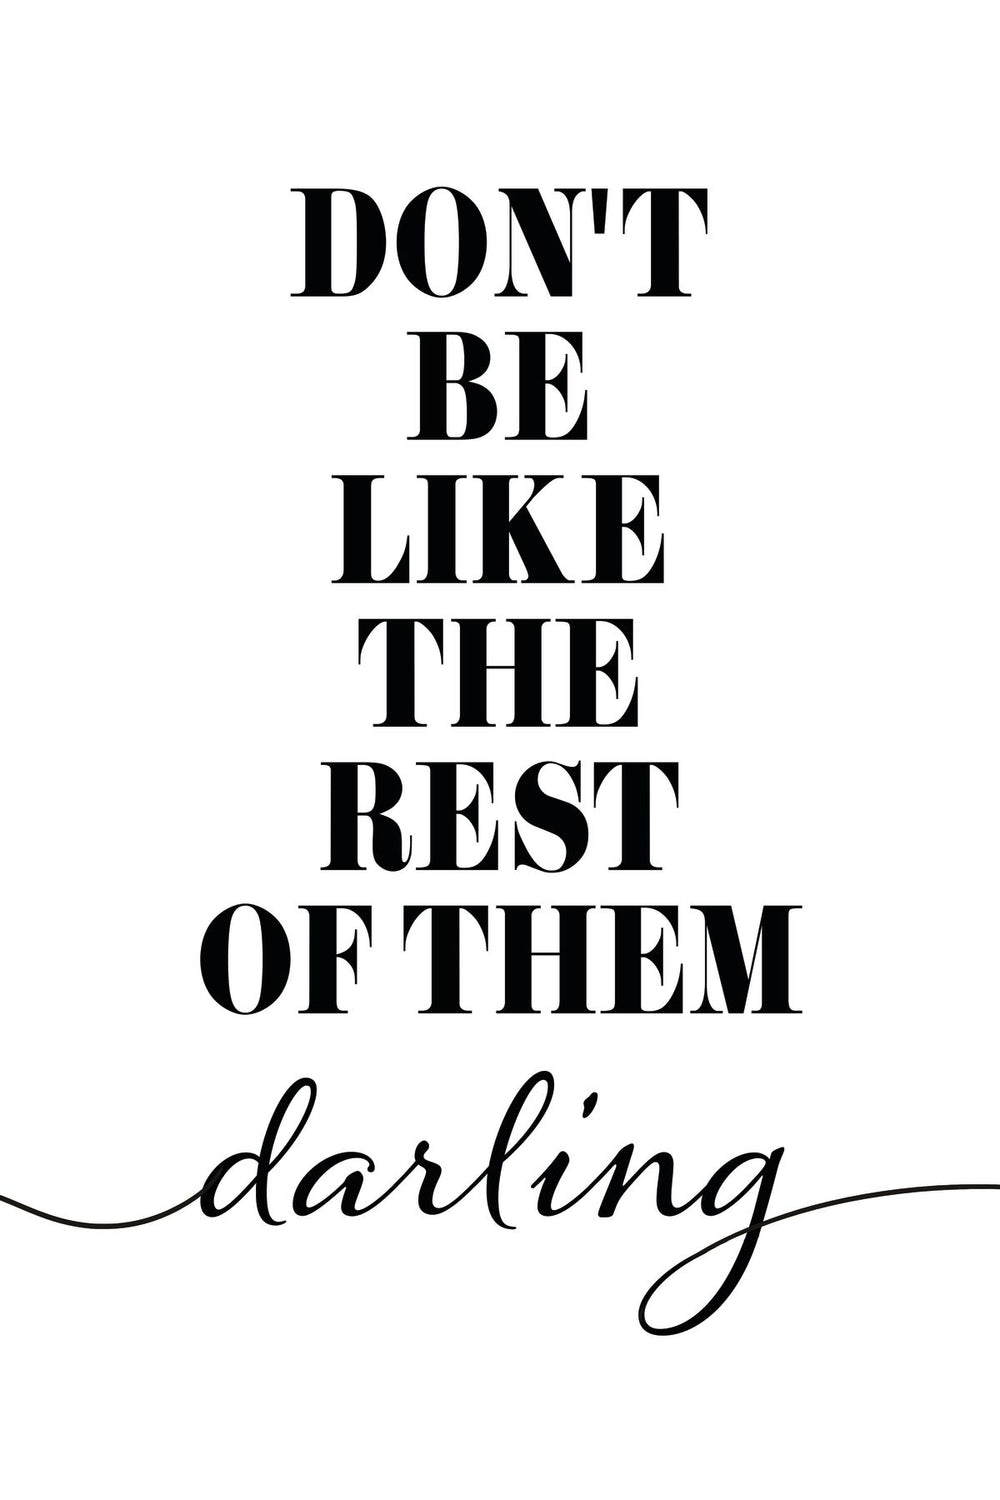 Don't Be Like Them Darling